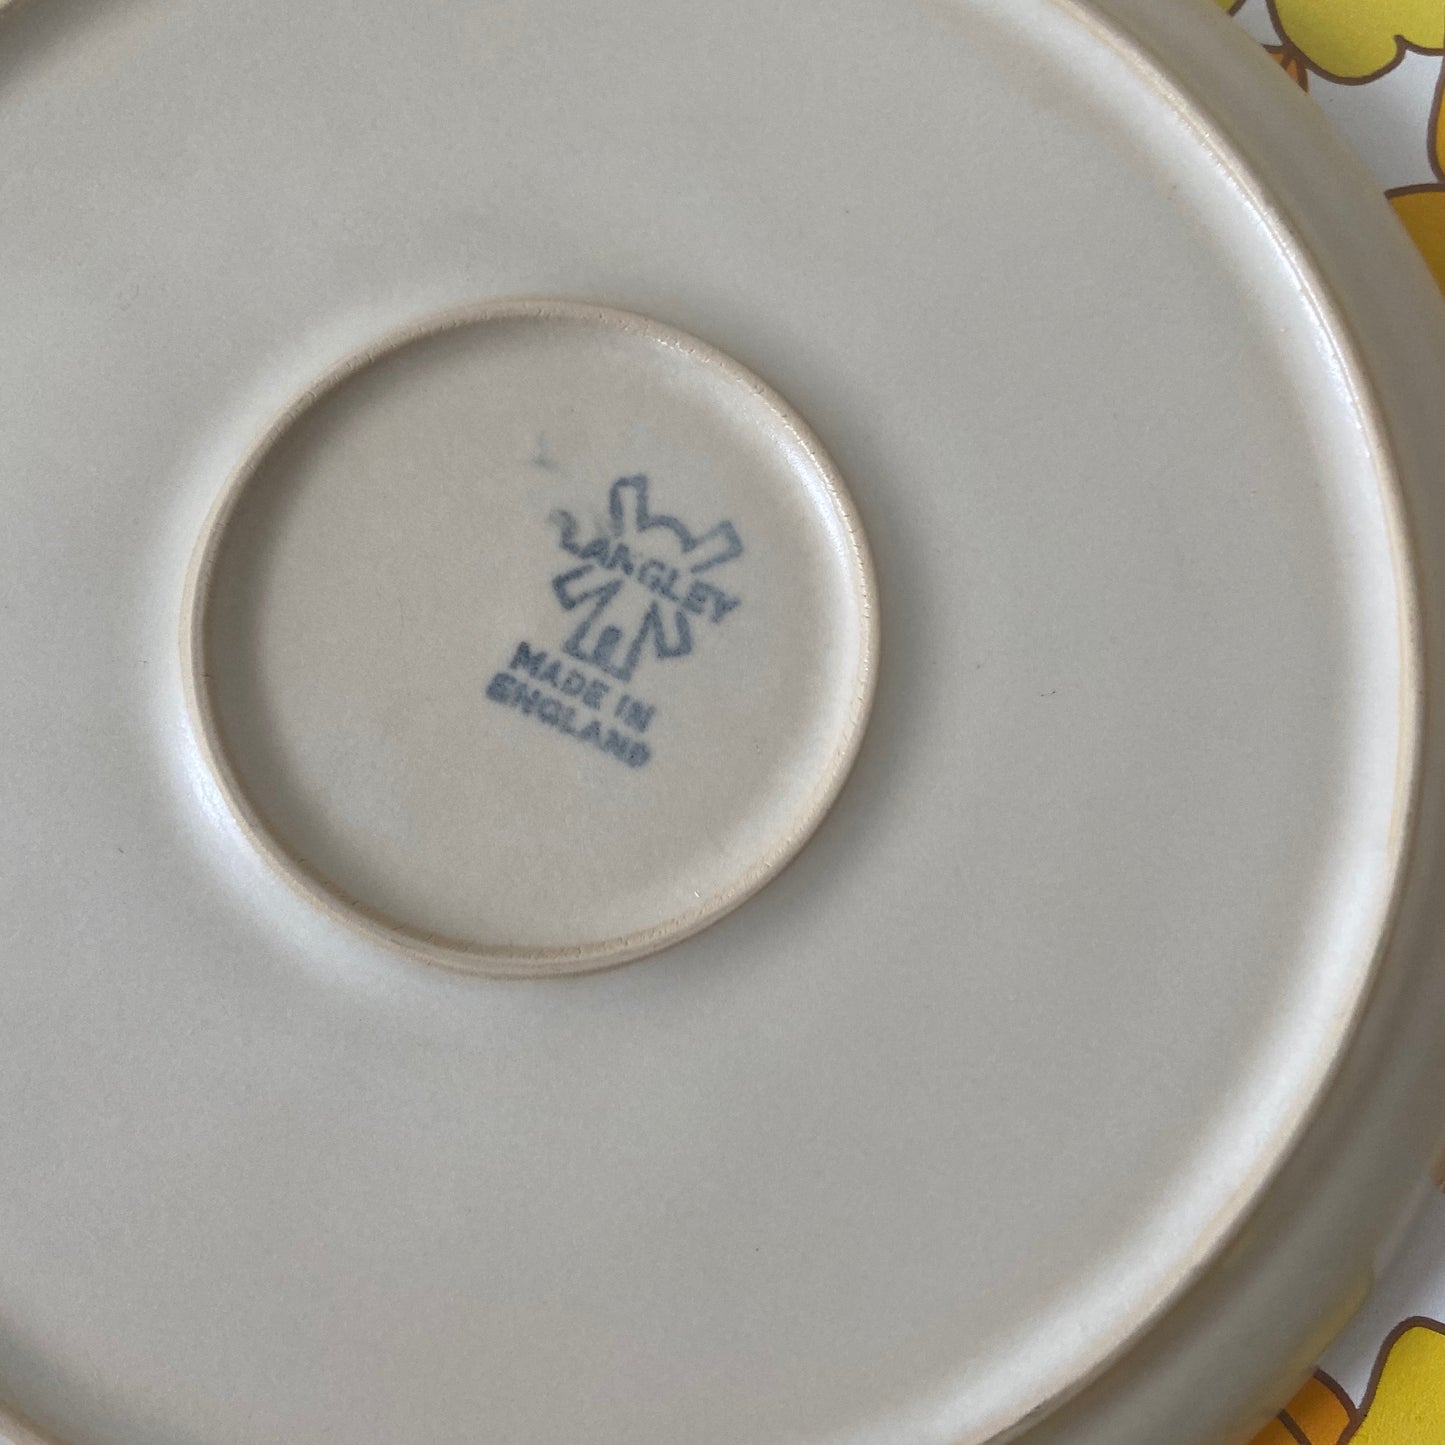 LANGLEY Made in England PLATE Retro Home Kitchen Dinner Party